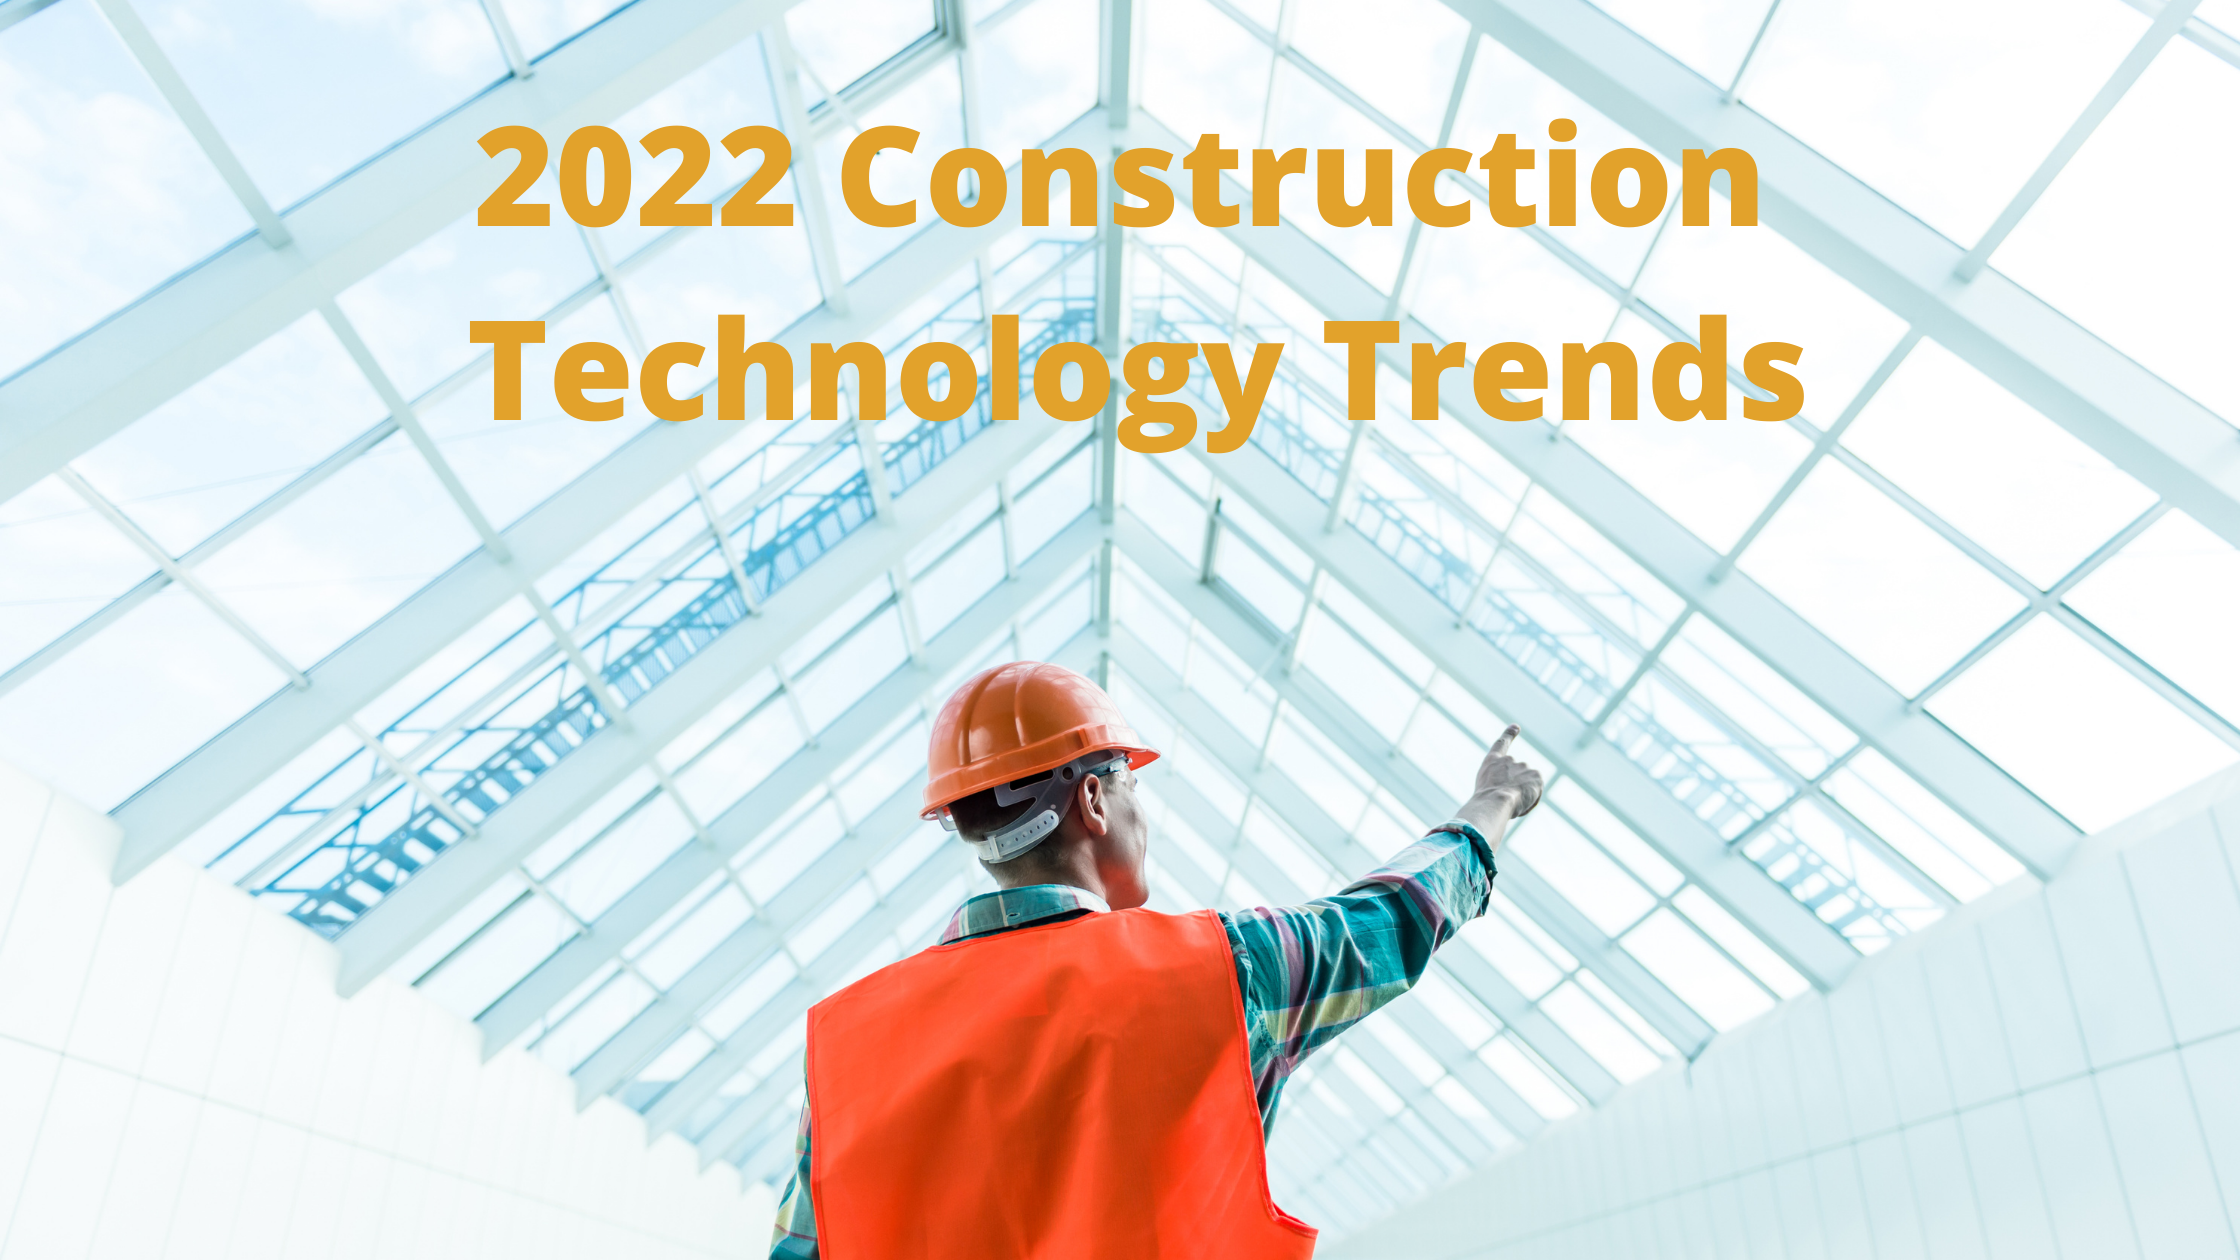 Construction worker standing beneath a building with the words “2022 Construction Technology Trends” superimposed over the top of the image.